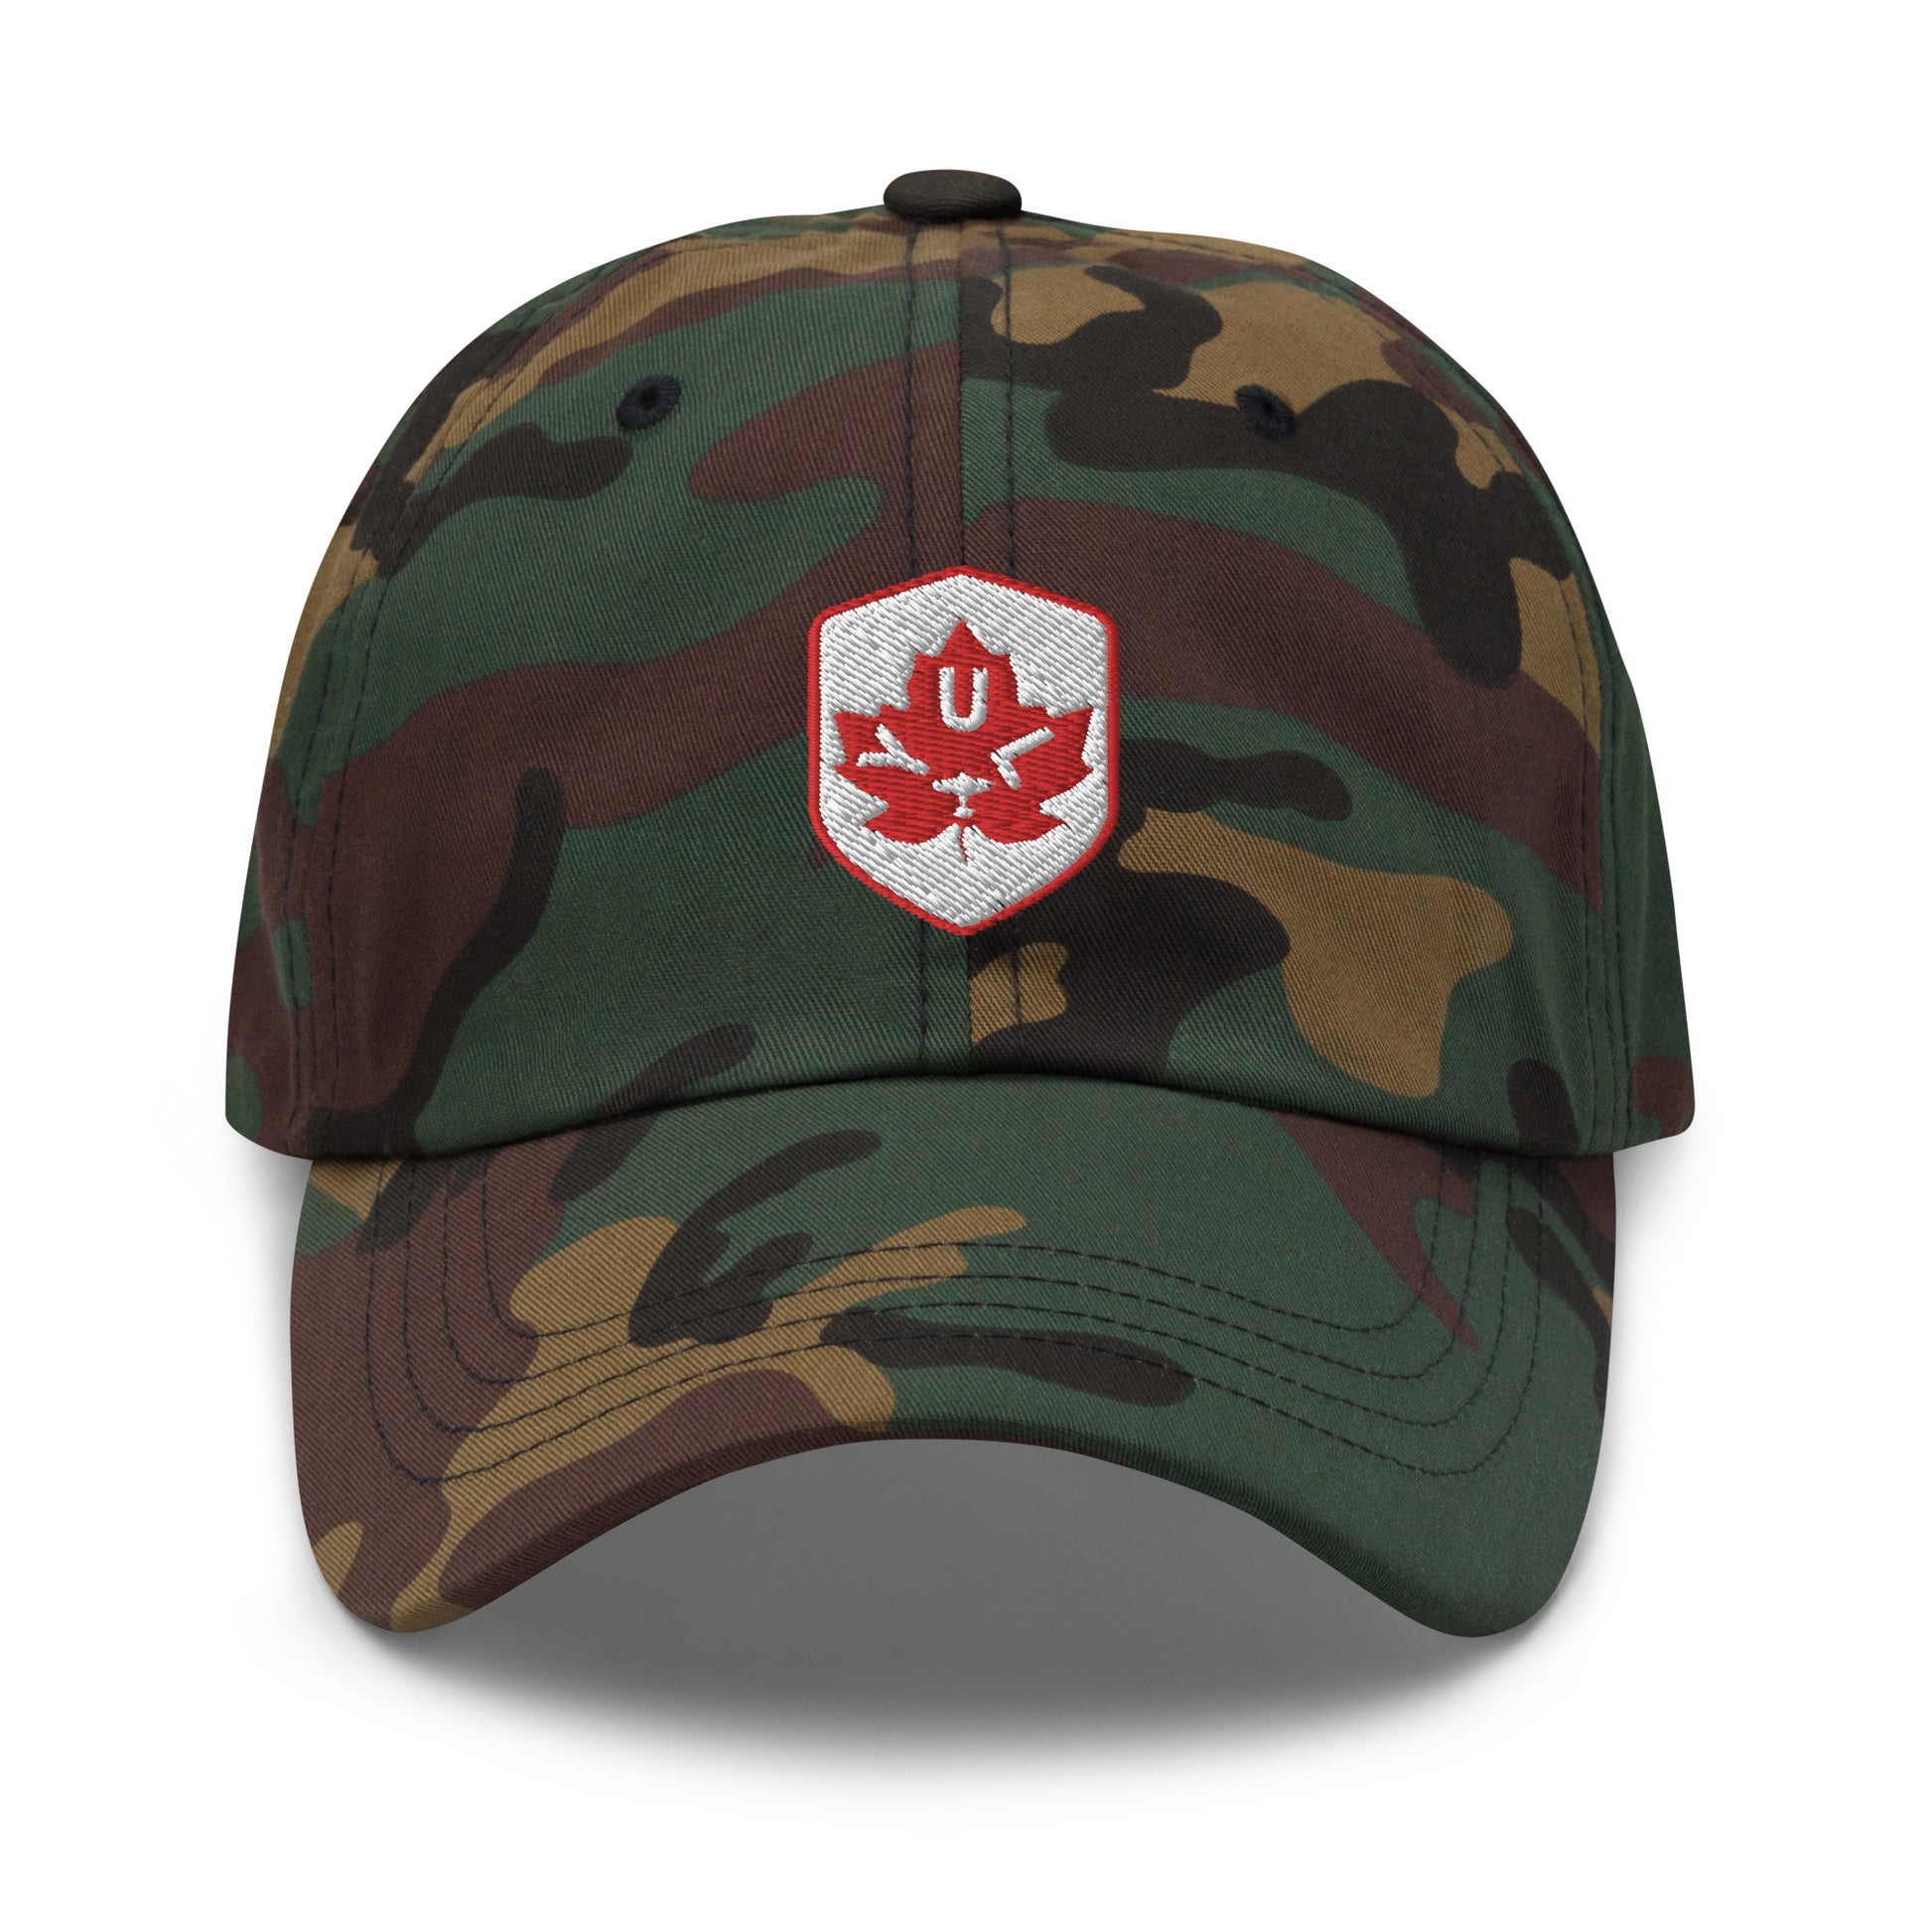 Maple Leaf Baseball Cap - Red/White • YUL Montreal • YHM Designs - Image 19